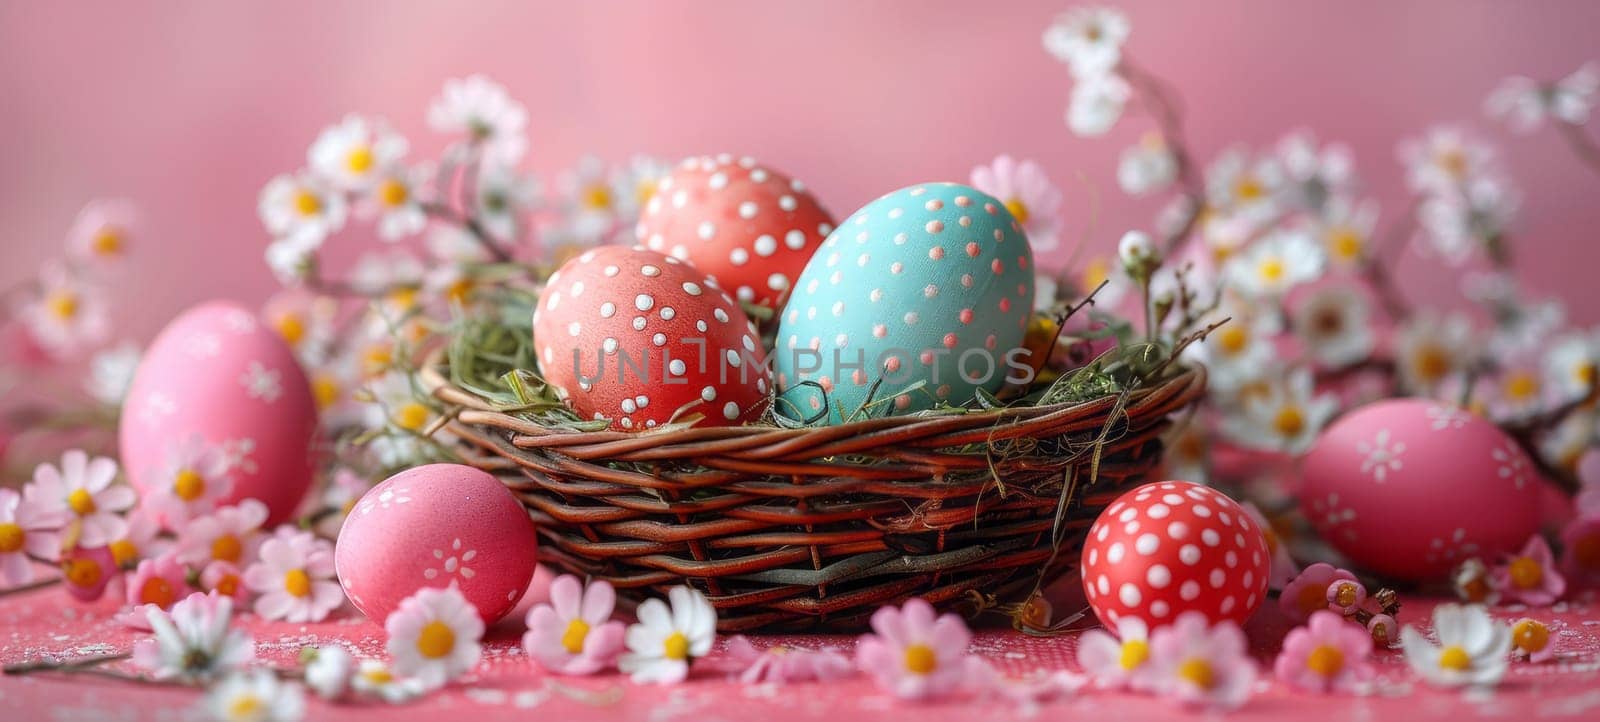 Easter holiday celebration banner greeting card banner with easter eggs and flowers on a pink background by NataliPopova